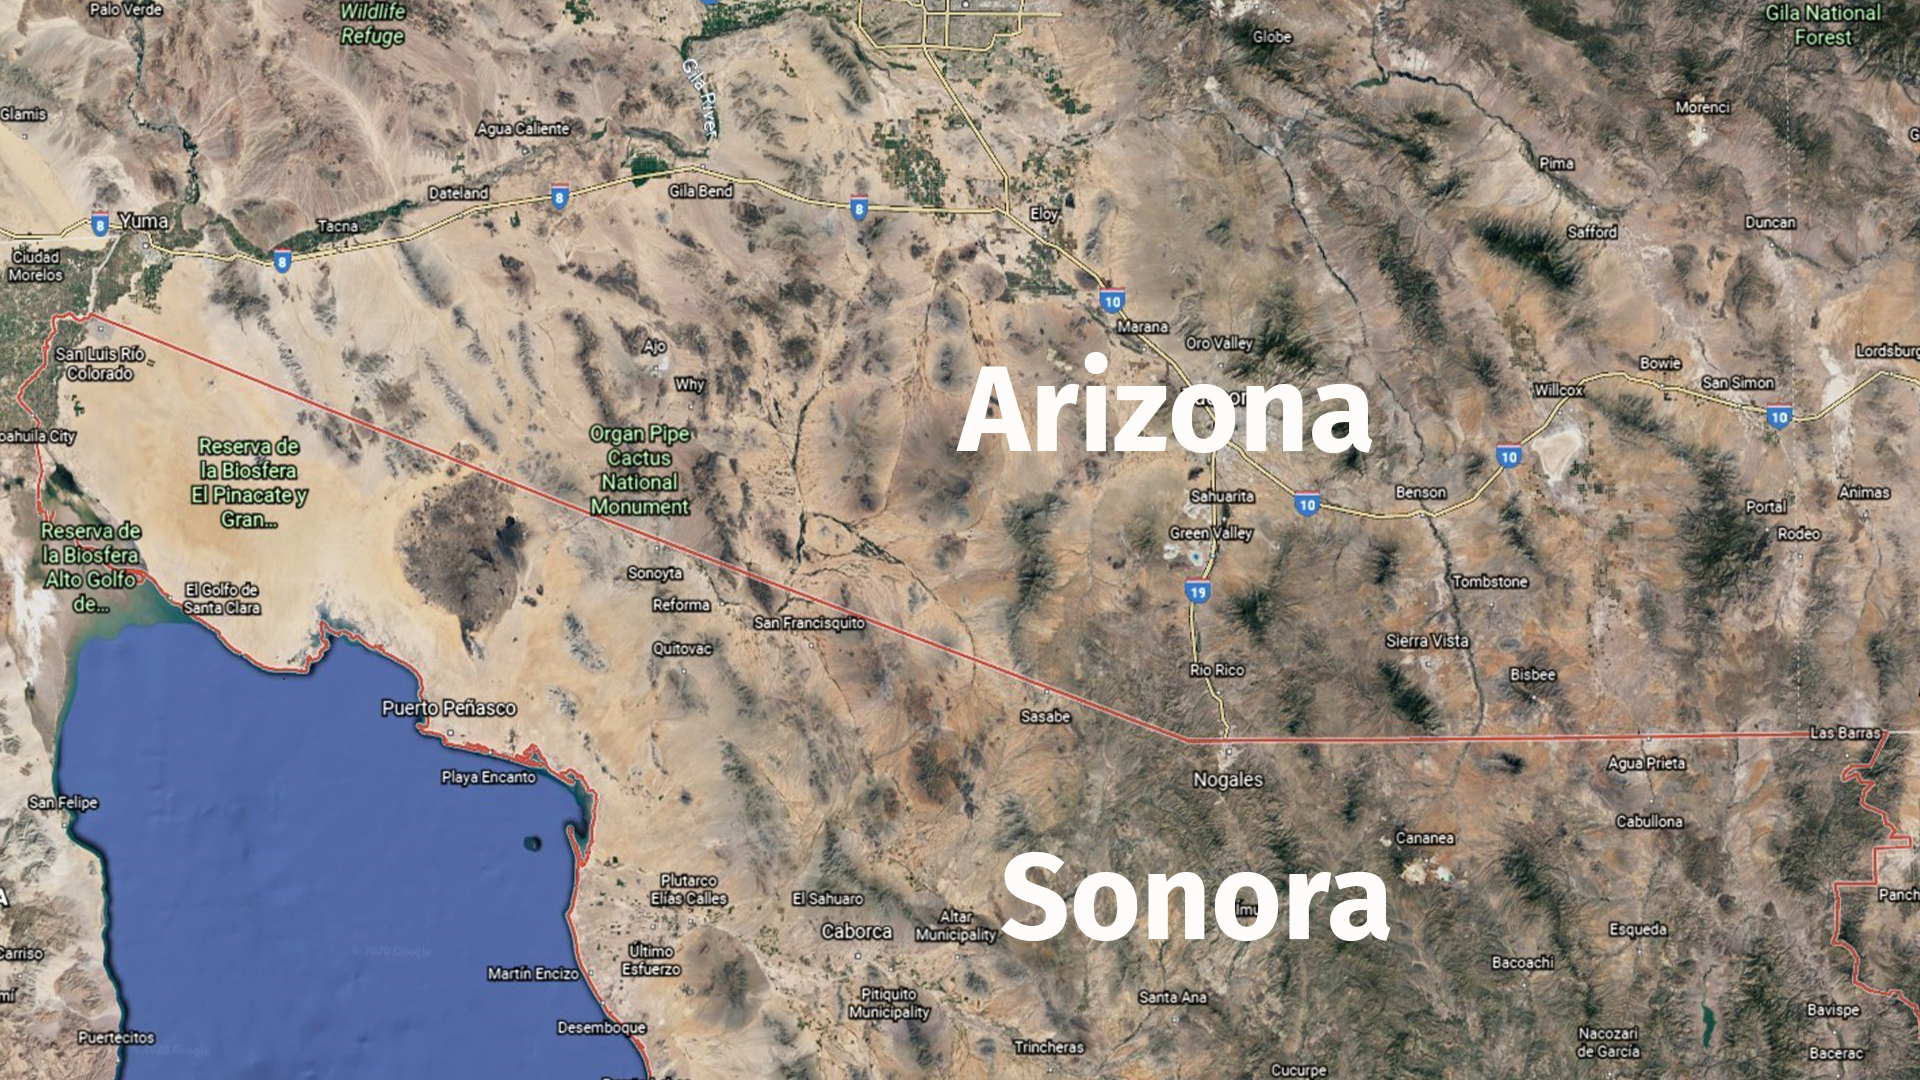 Sonora, Arizona and New Mexico seek to promote different initiatives for the region